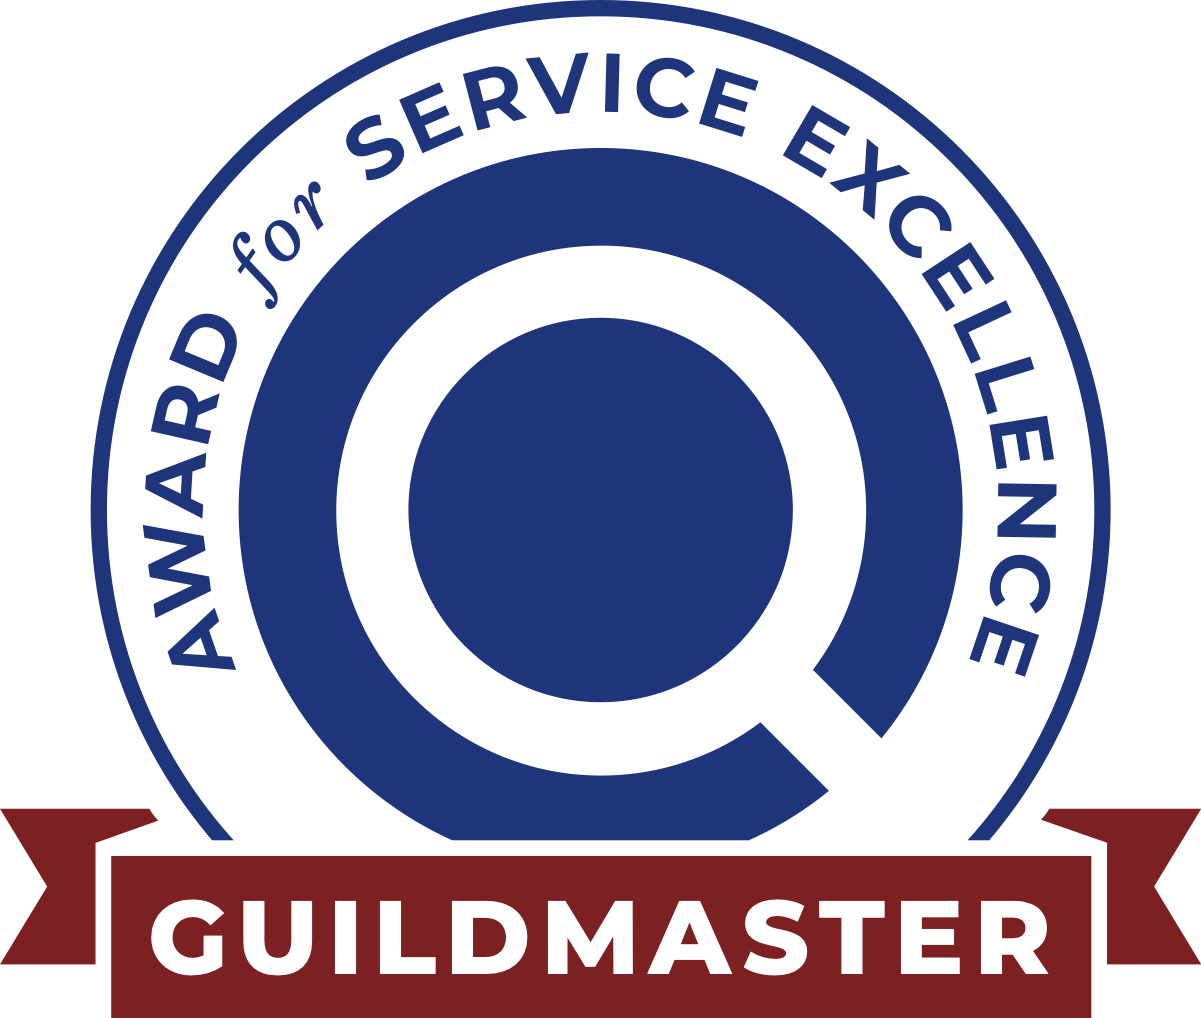 Award for Service Excellence | Guildmaster